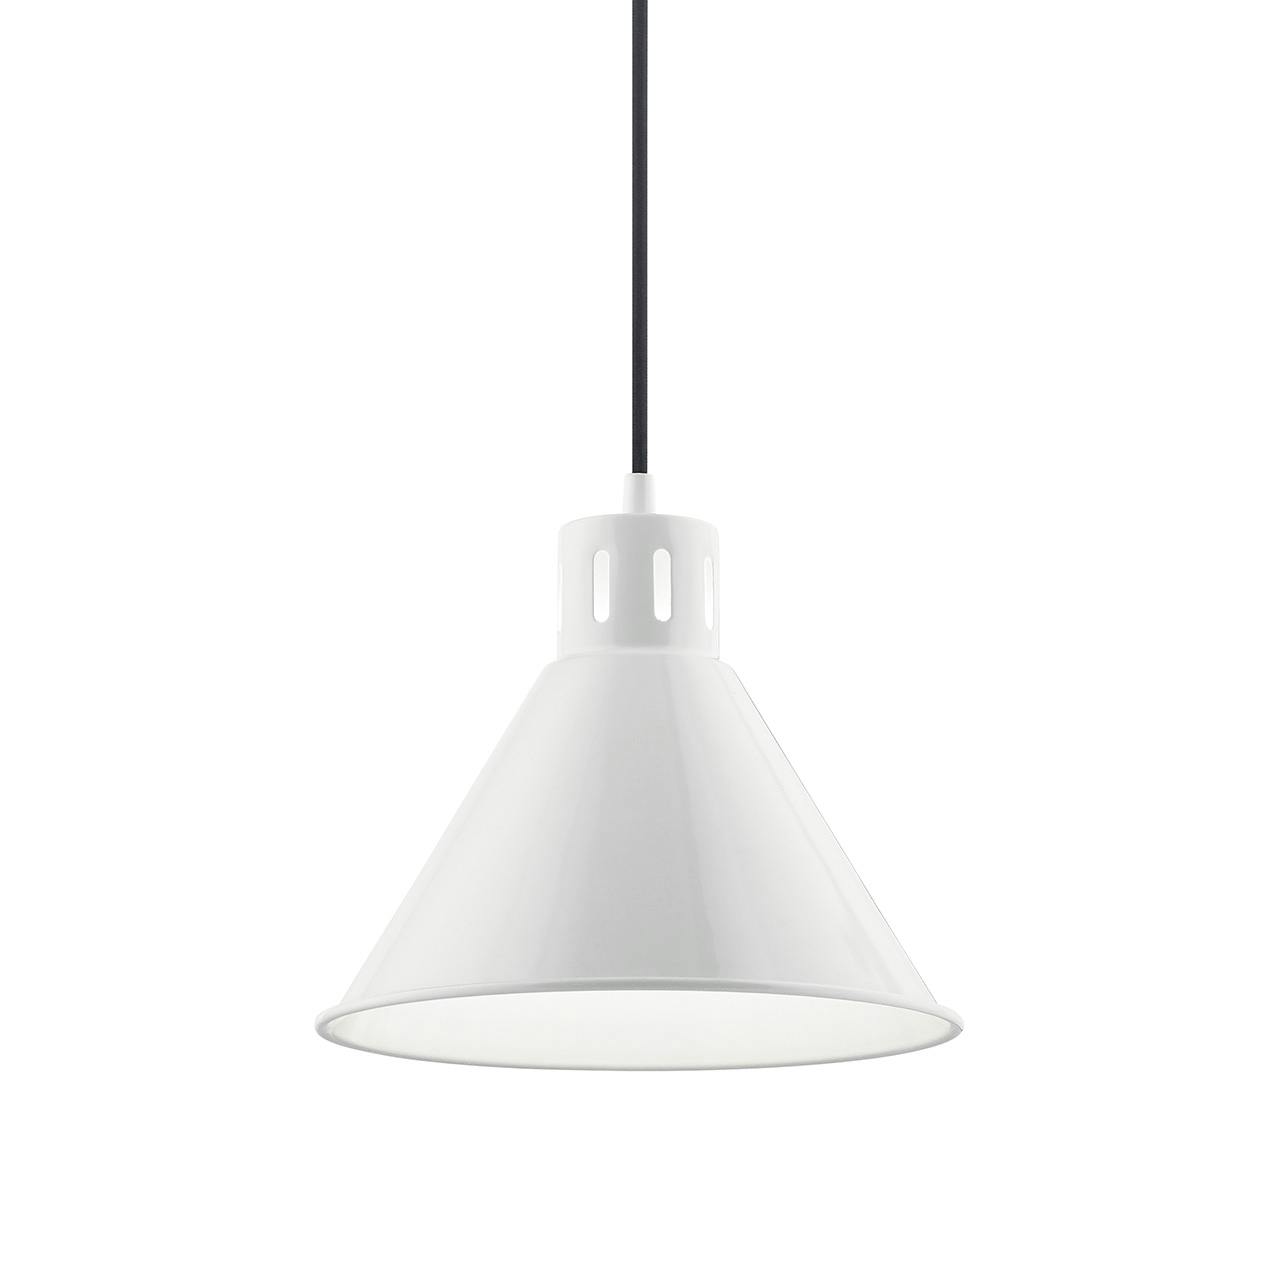 Zailey™ 9.5" 1 Light Pendant in White without the canopy on a white background